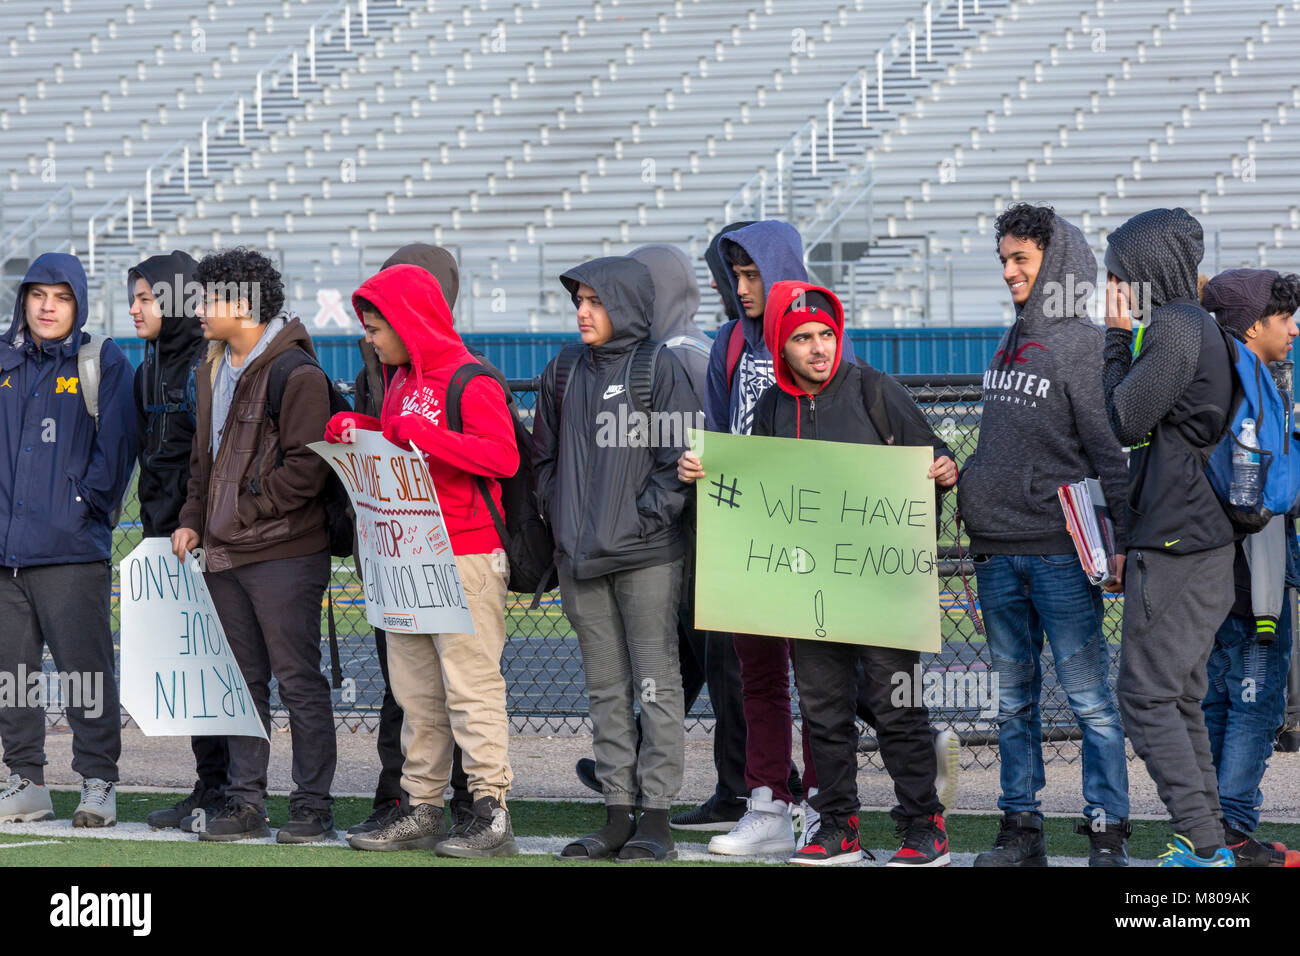 Dearborn, Michigan USA - 14 March 2018 - Students from Fordson High School walked out of class for 17 minutes one month after 17 persons were killed in the Parkland High School shooting. They were part of a national student protest against gun violence. Stock Photo